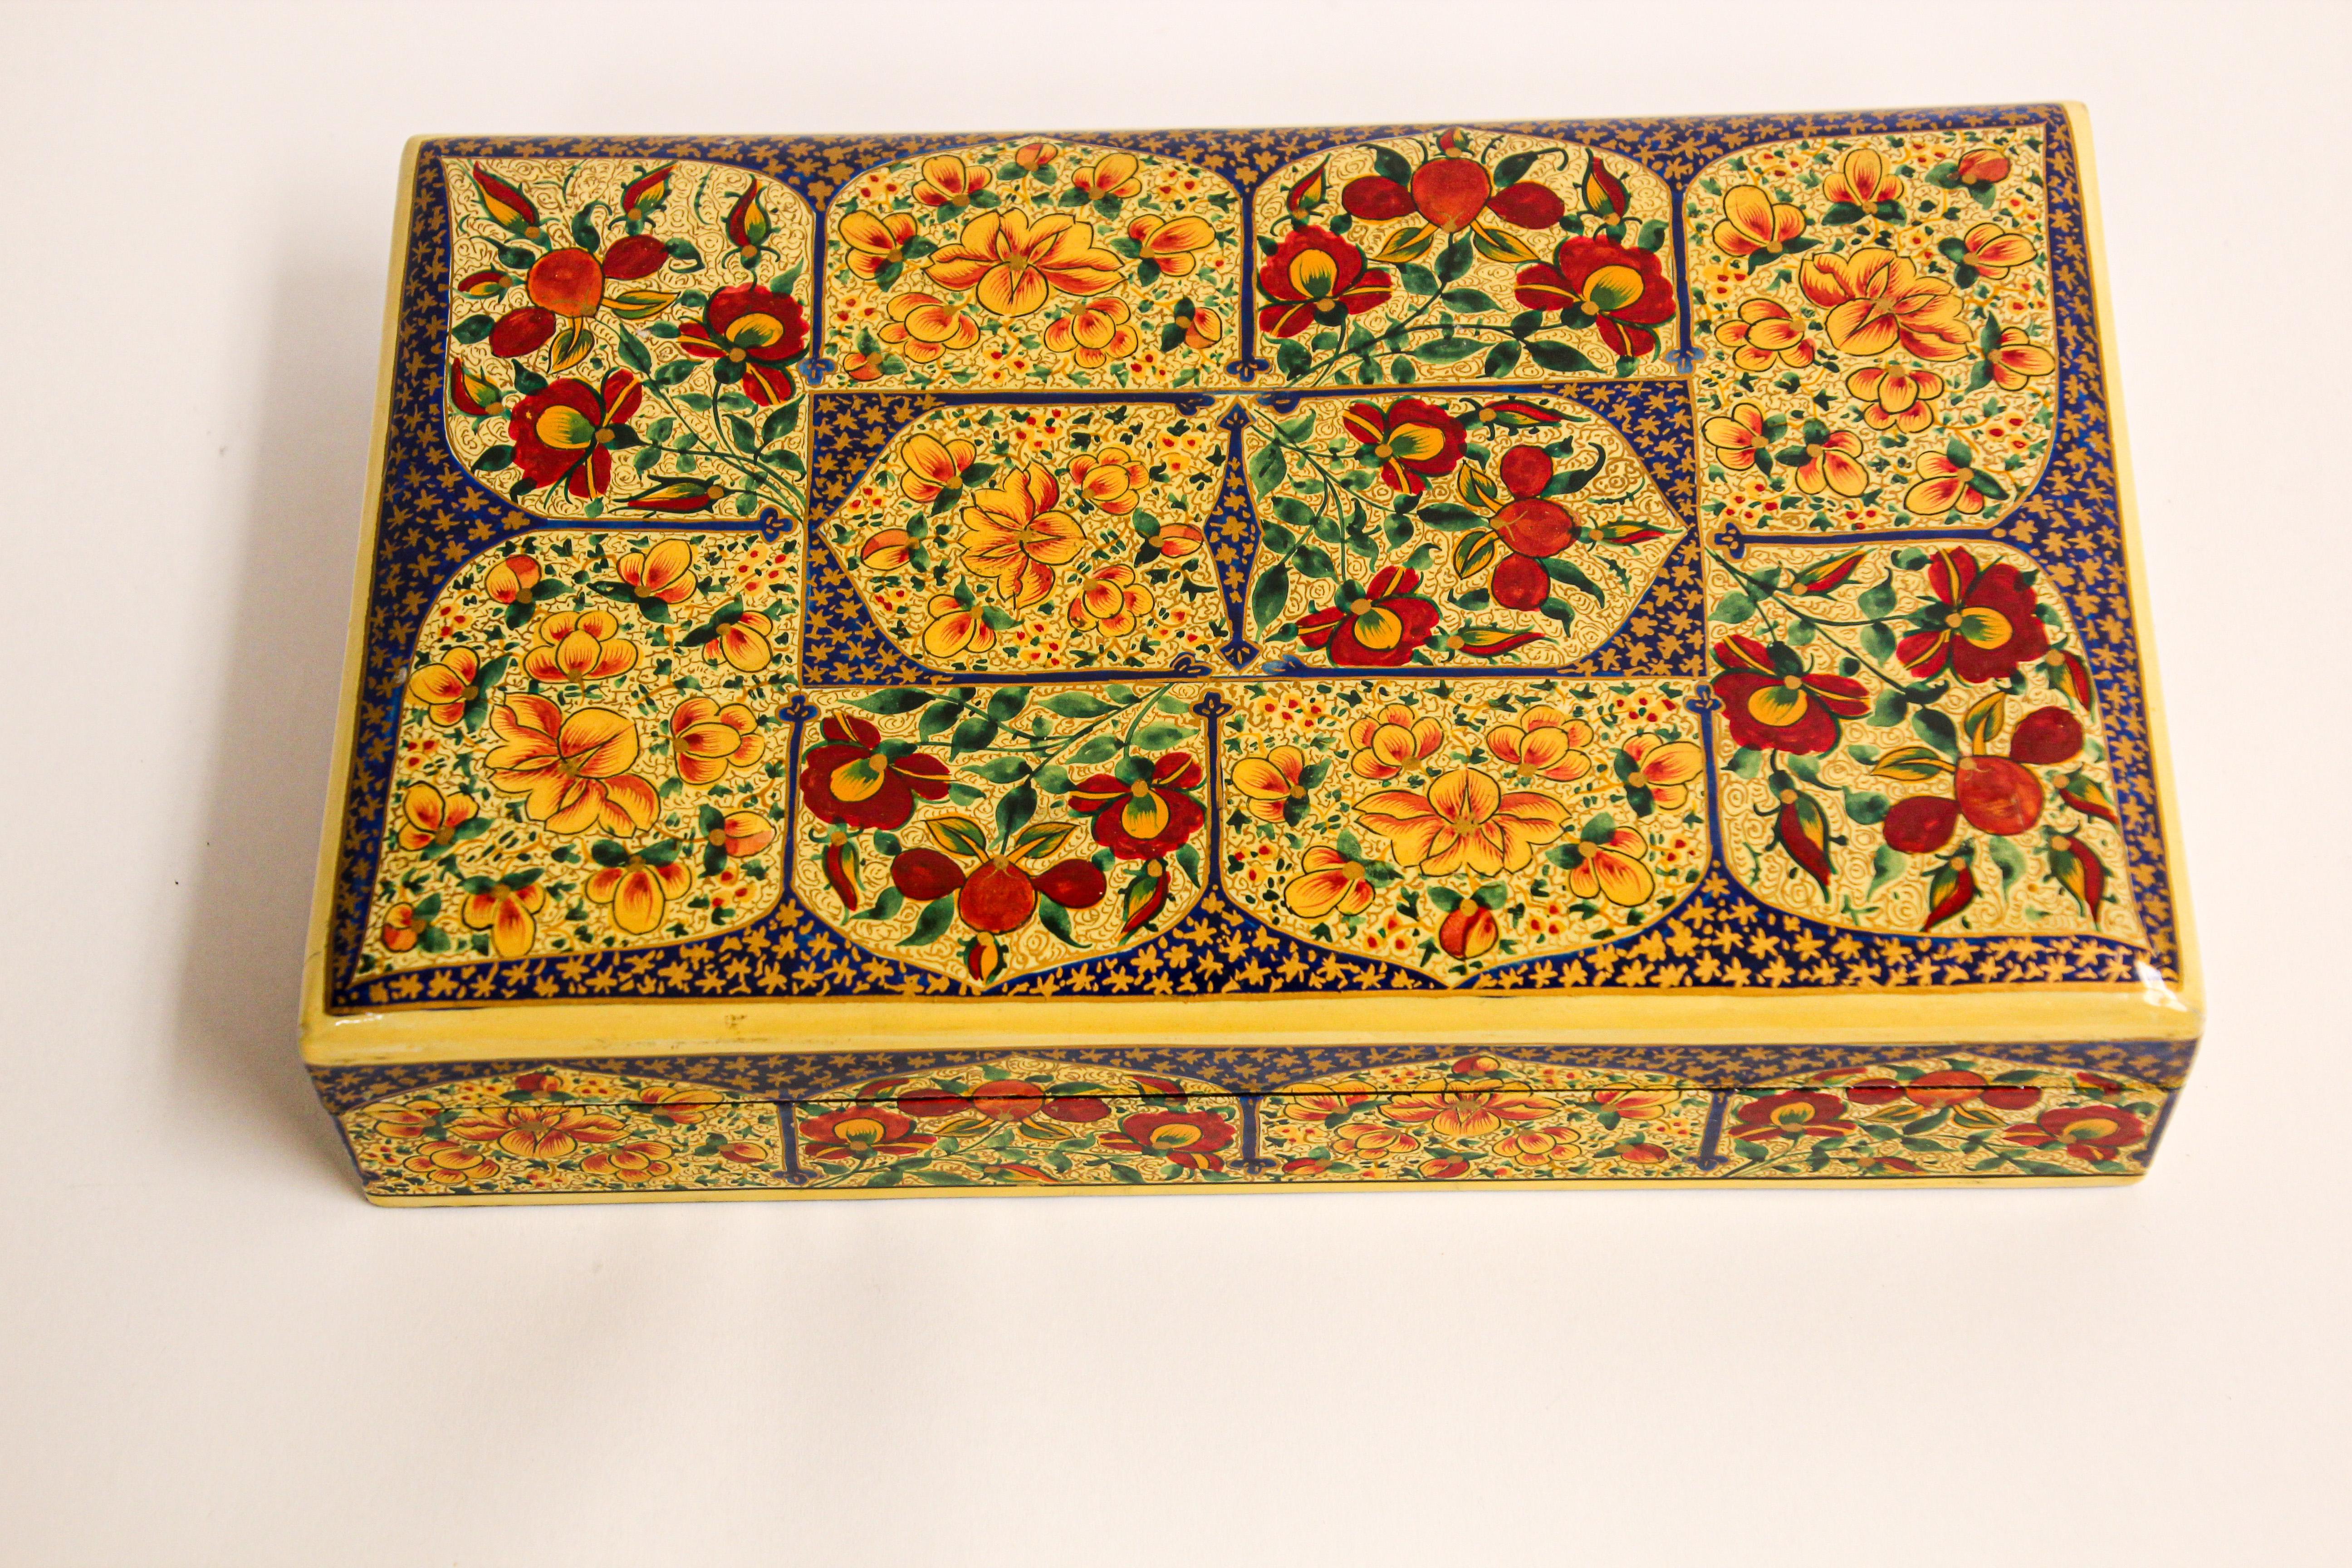 Hand Painted Rajasthani Lacquer Decorative Box In Good Condition For Sale In North Hollywood, CA